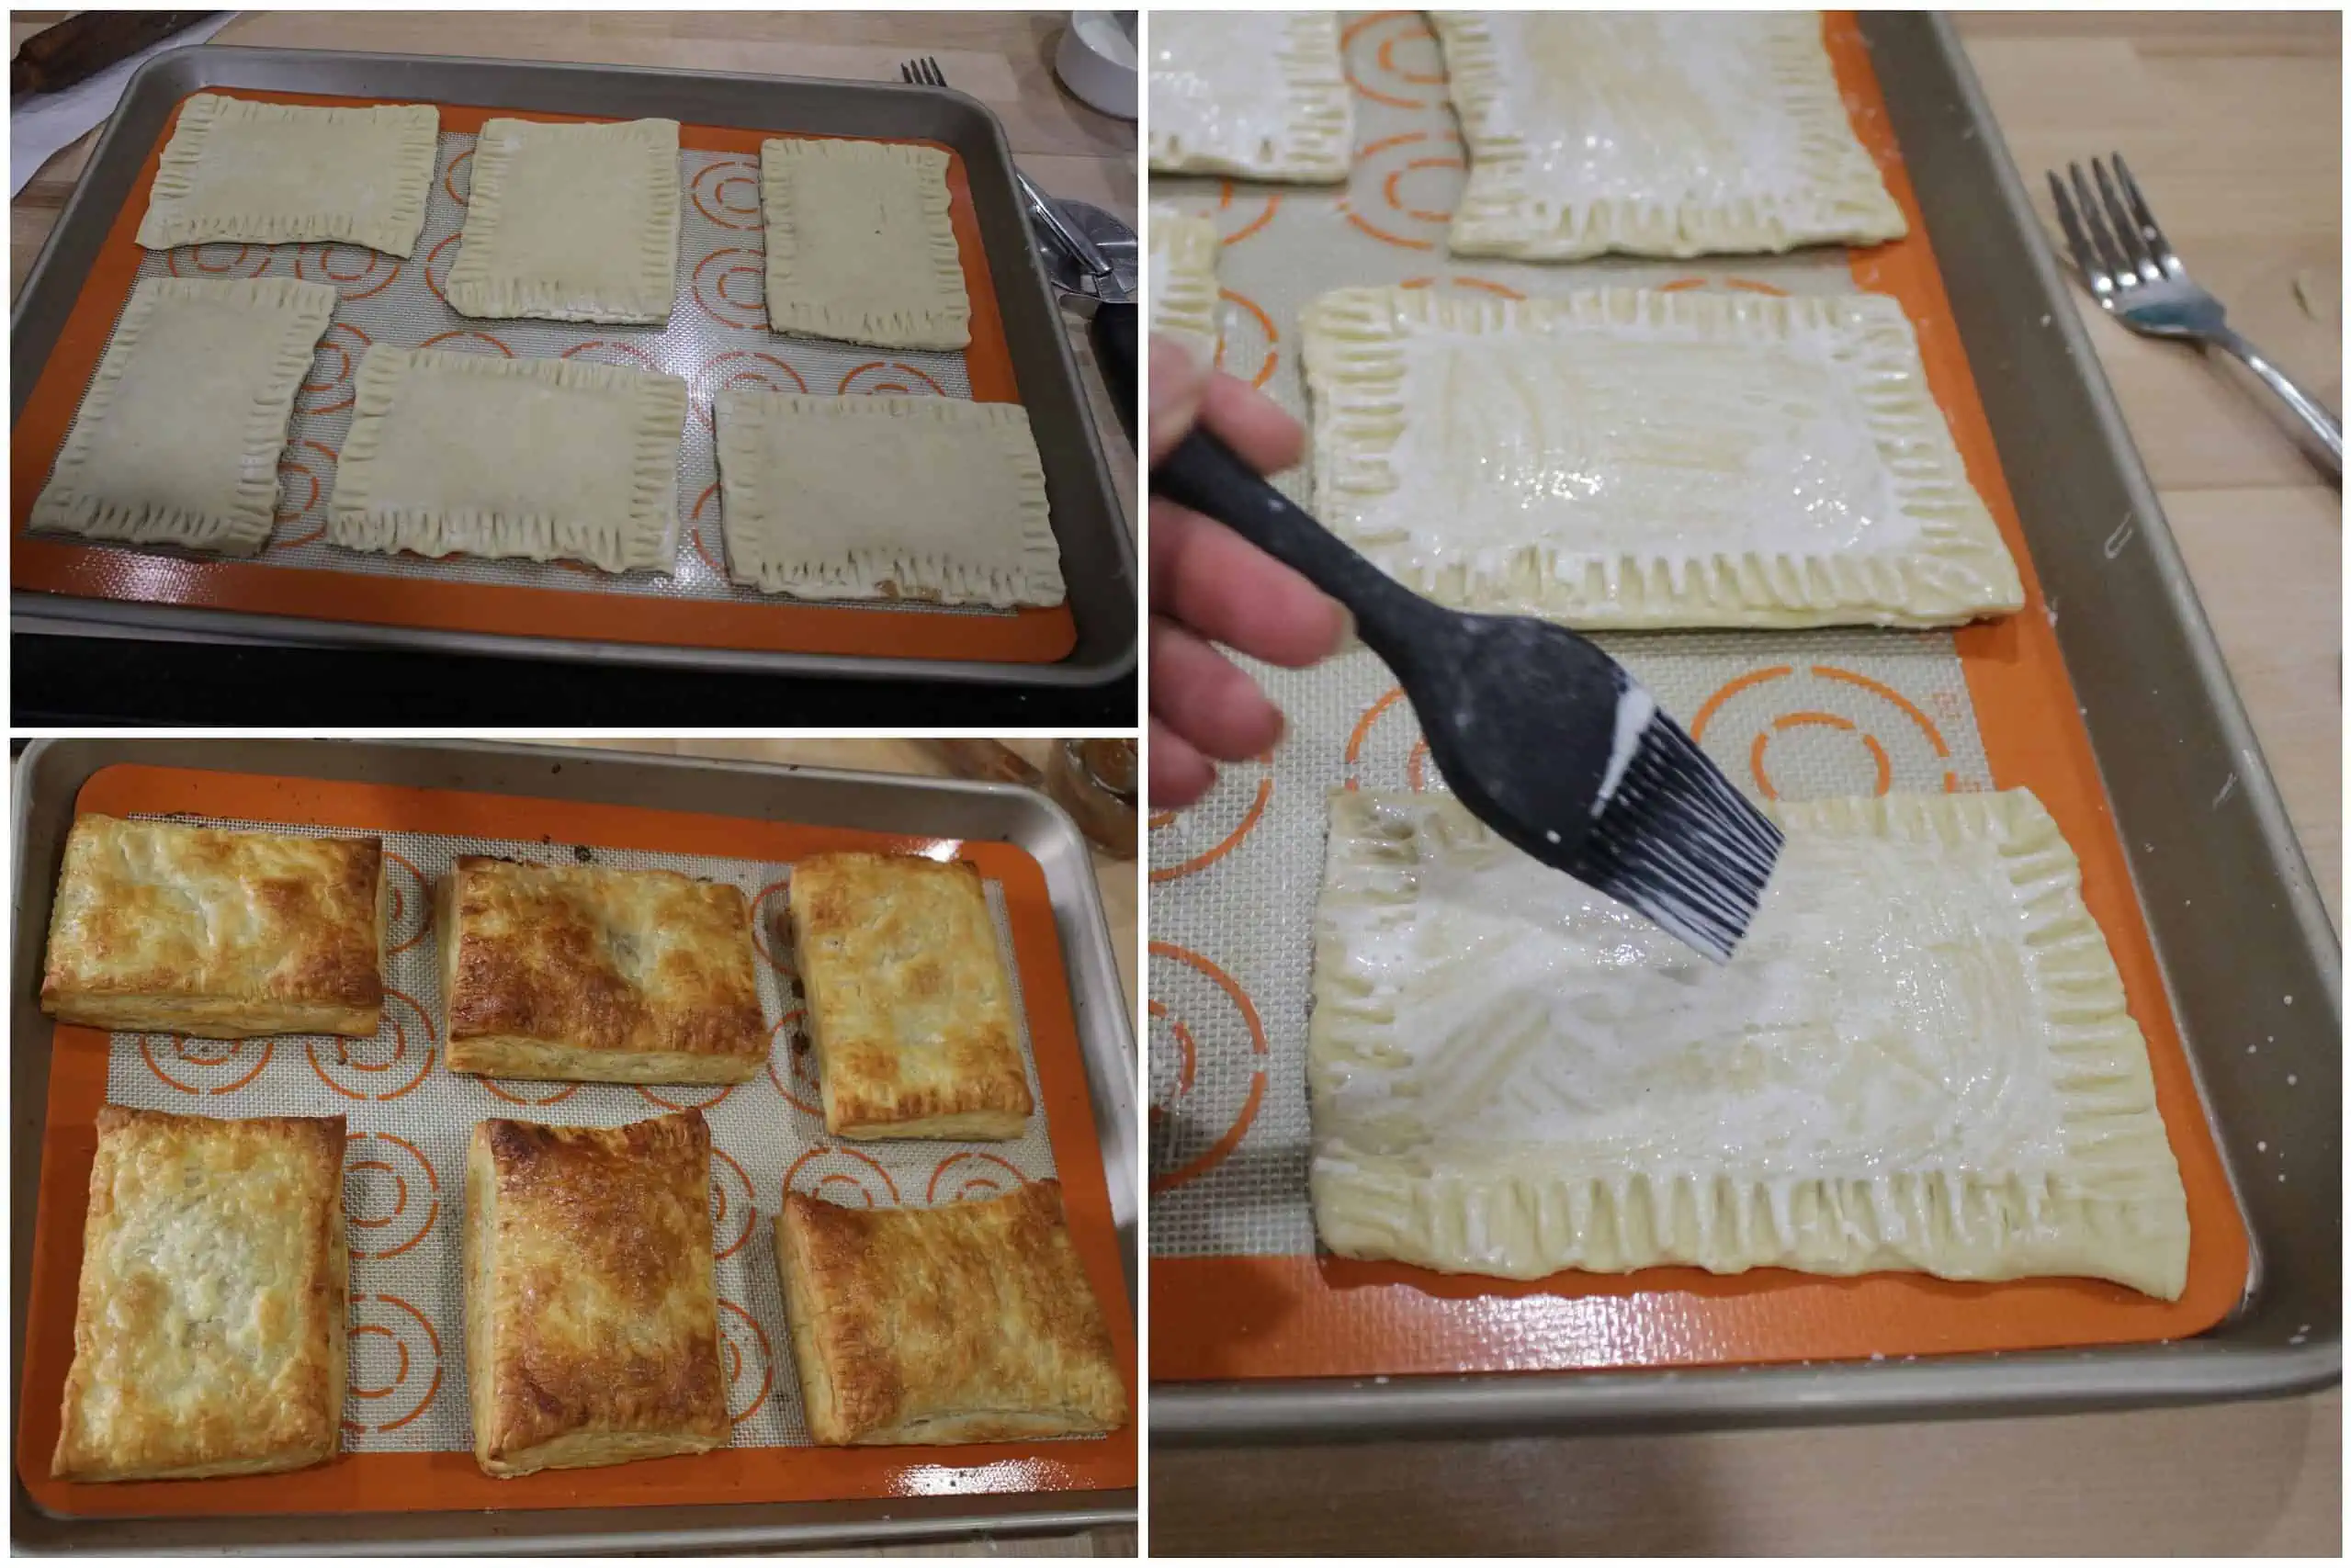 Process shot to bake the puff pastry toaster strudel.